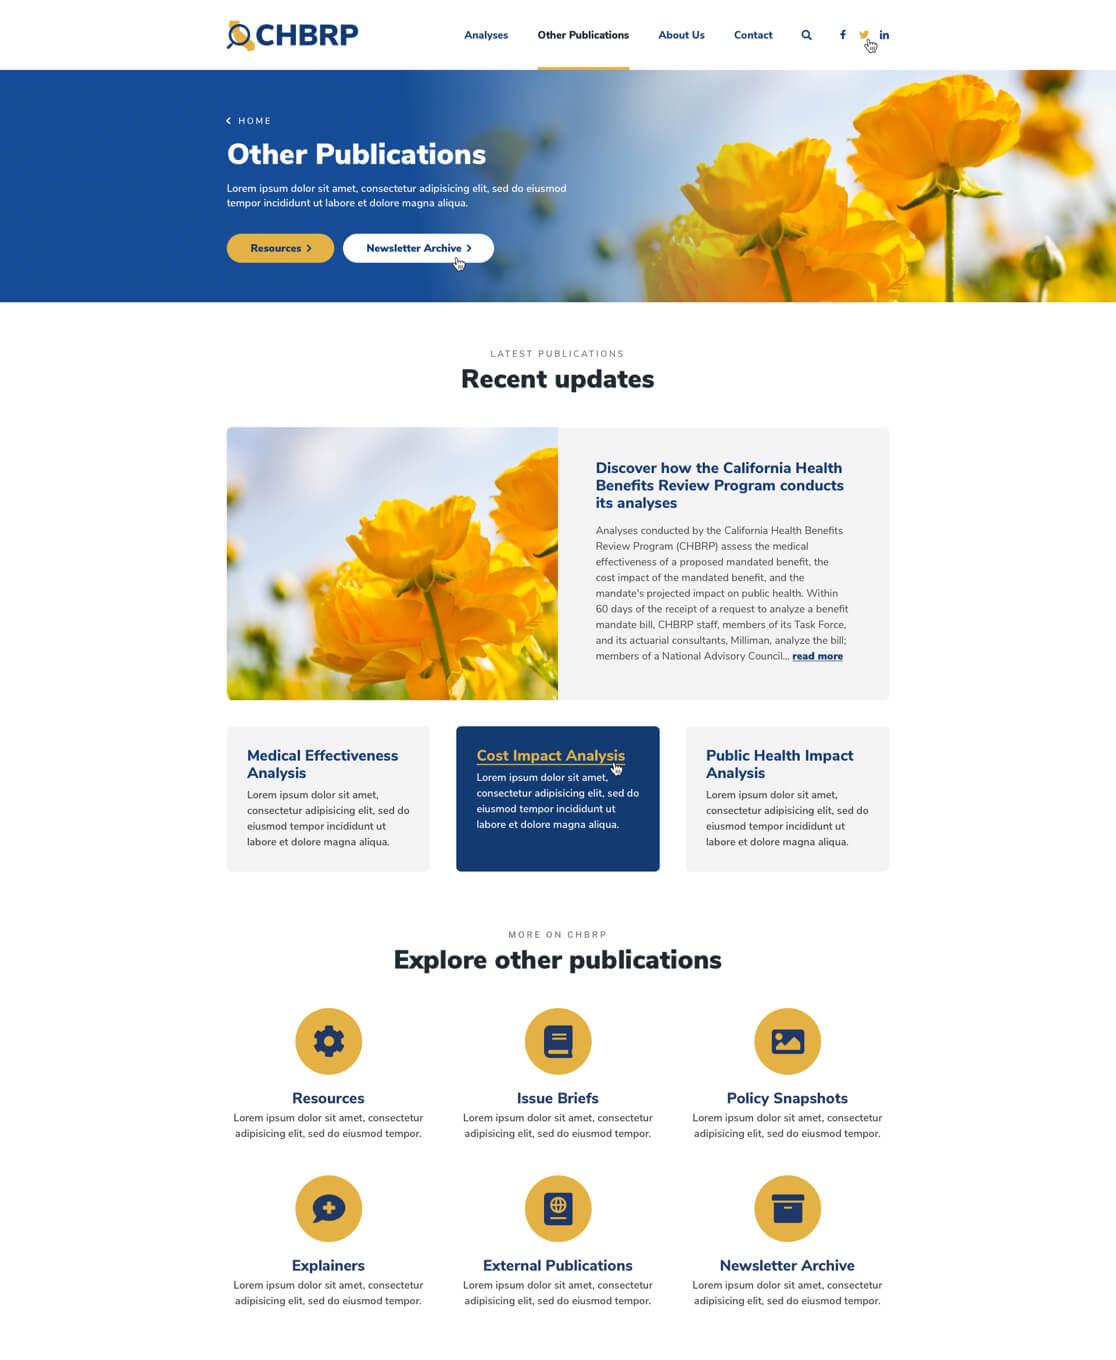 Design of the Other Publications landing page